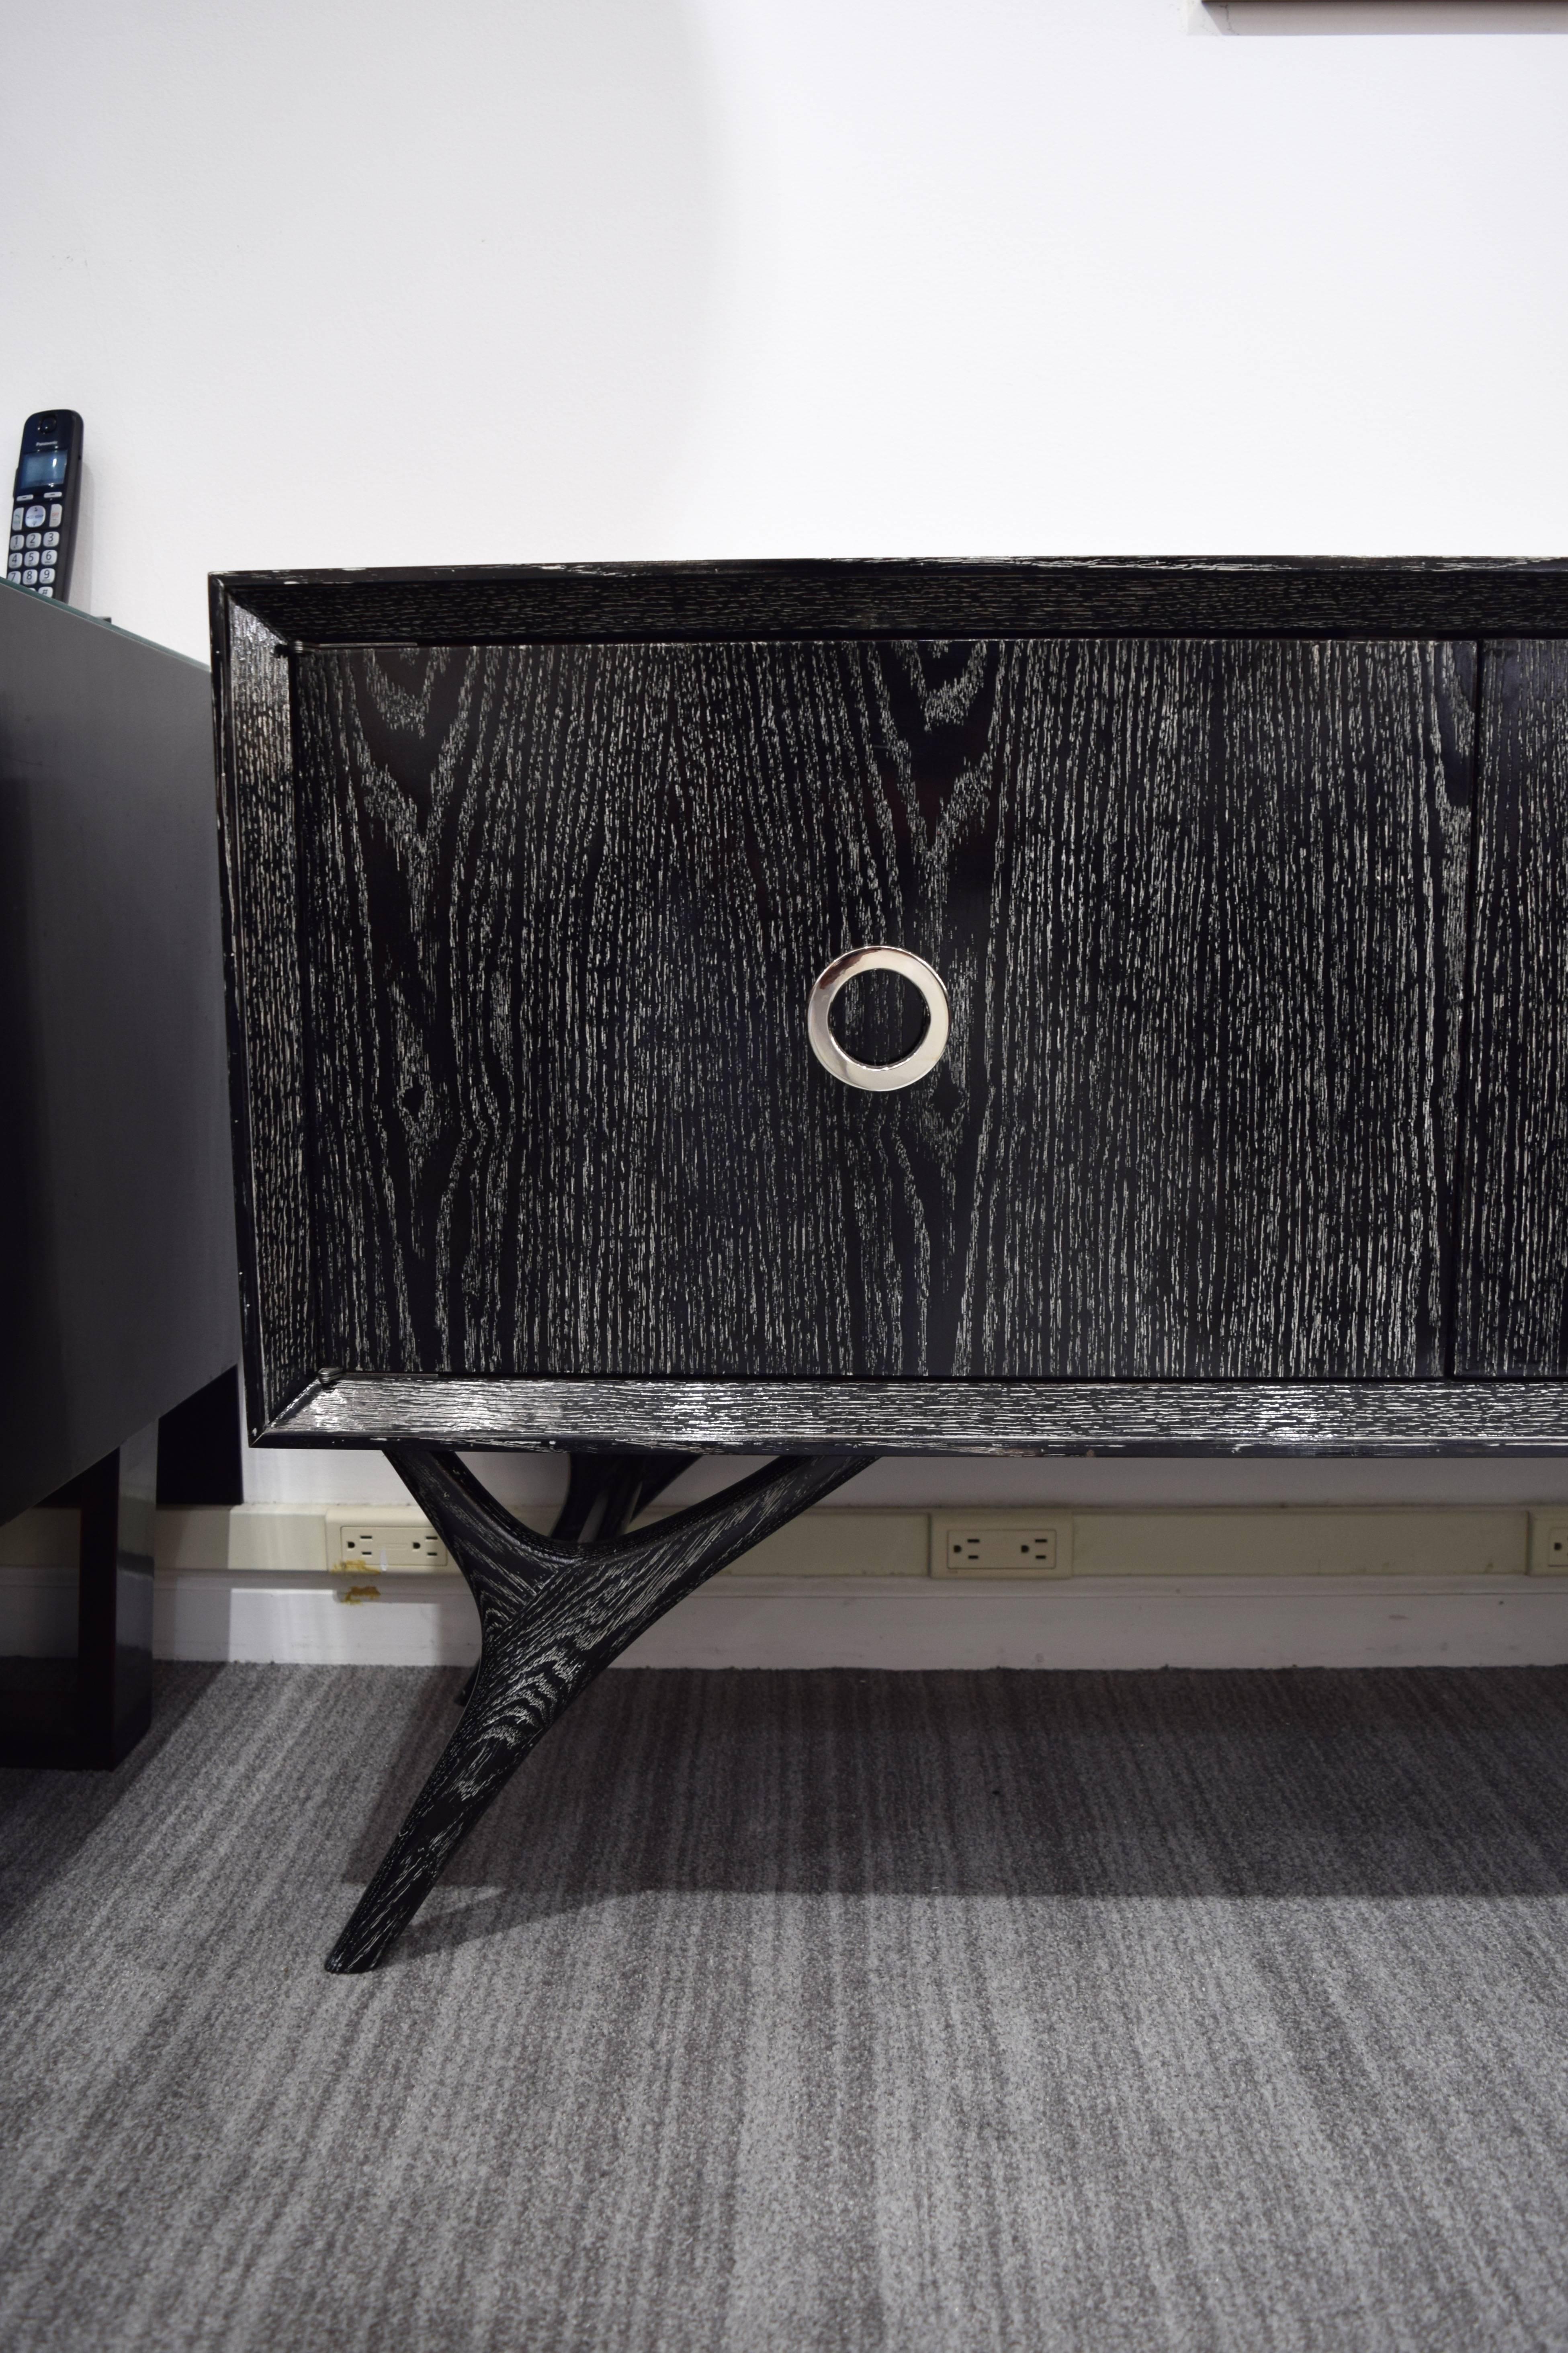 By popular request, Irwin Feld Design for CF Modern presents the Finn Leg Credenza, shown here is black cerused oak with nickel hardware. We can configure this credenza to your particular size, add a drawer, shelves or open space. Available in CFM